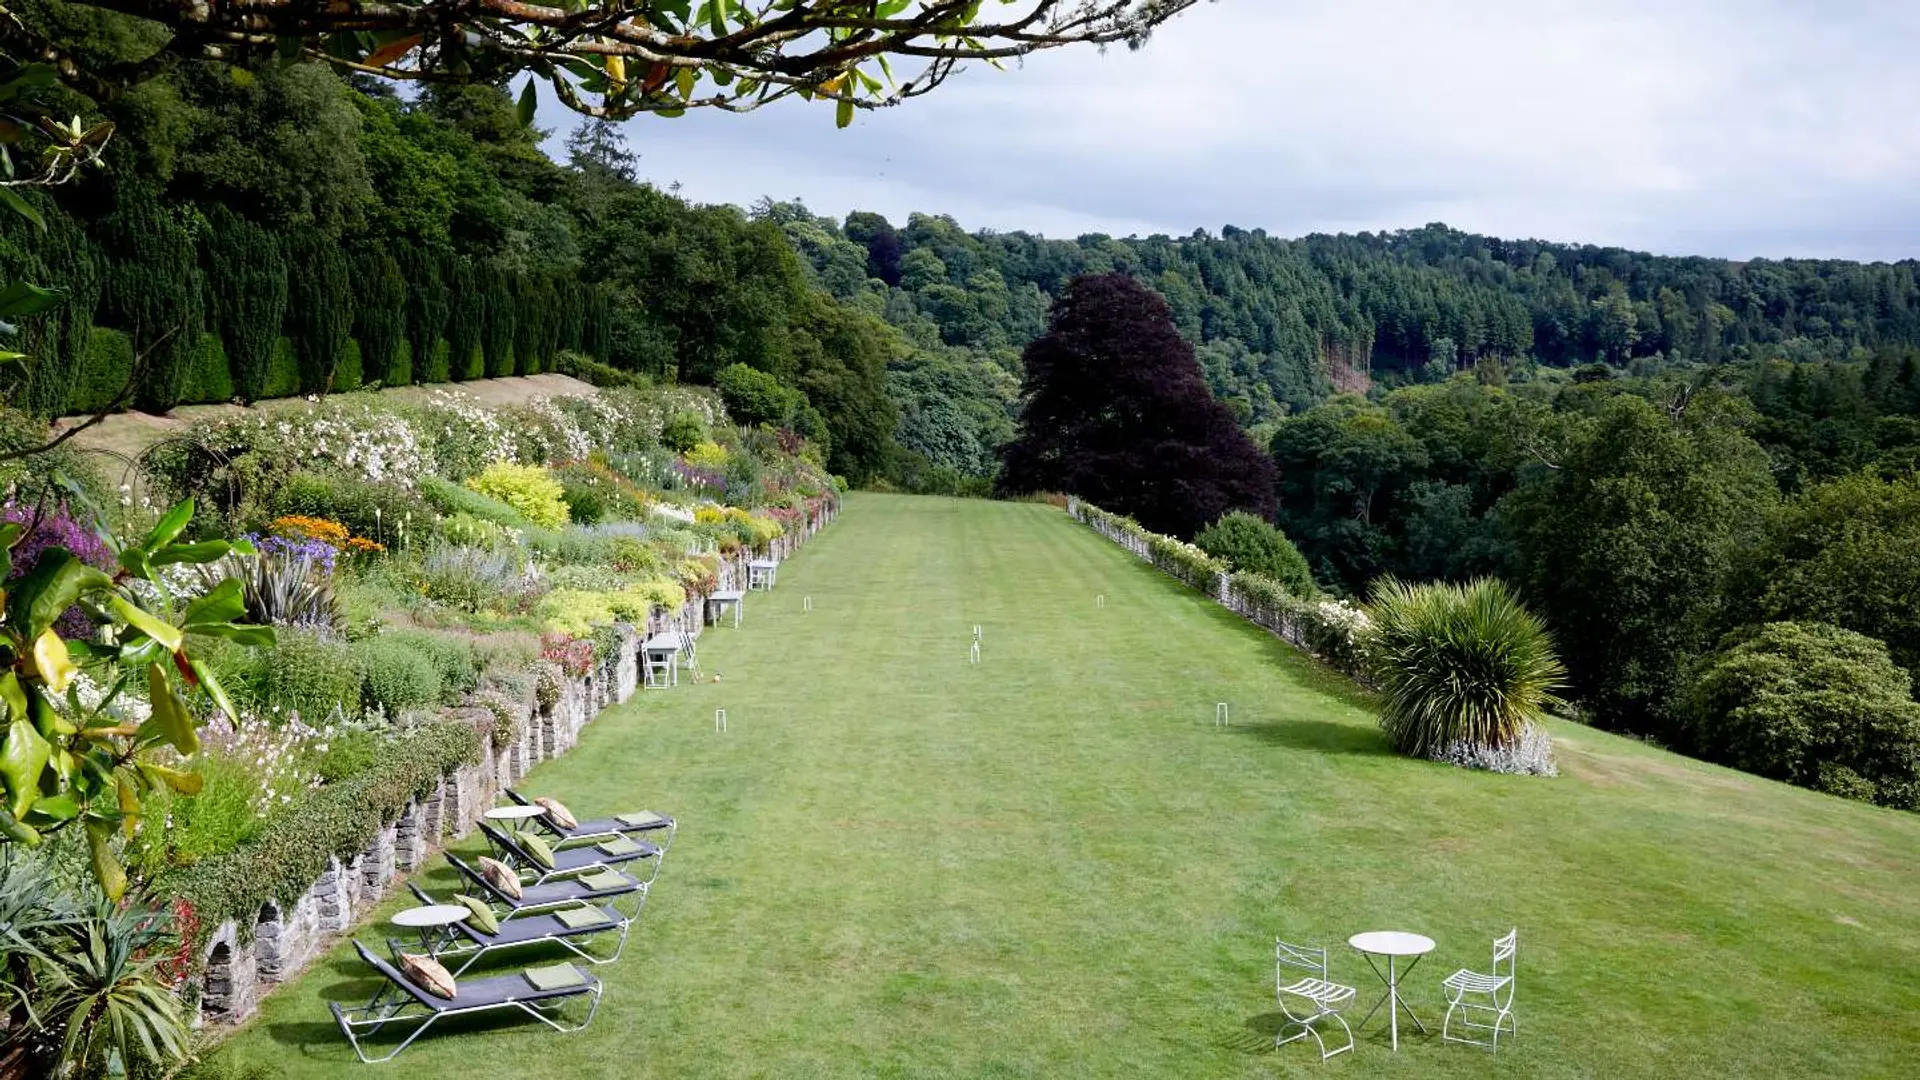 Hotel review Service & Facilities' - Hotel Endsleigh - 1